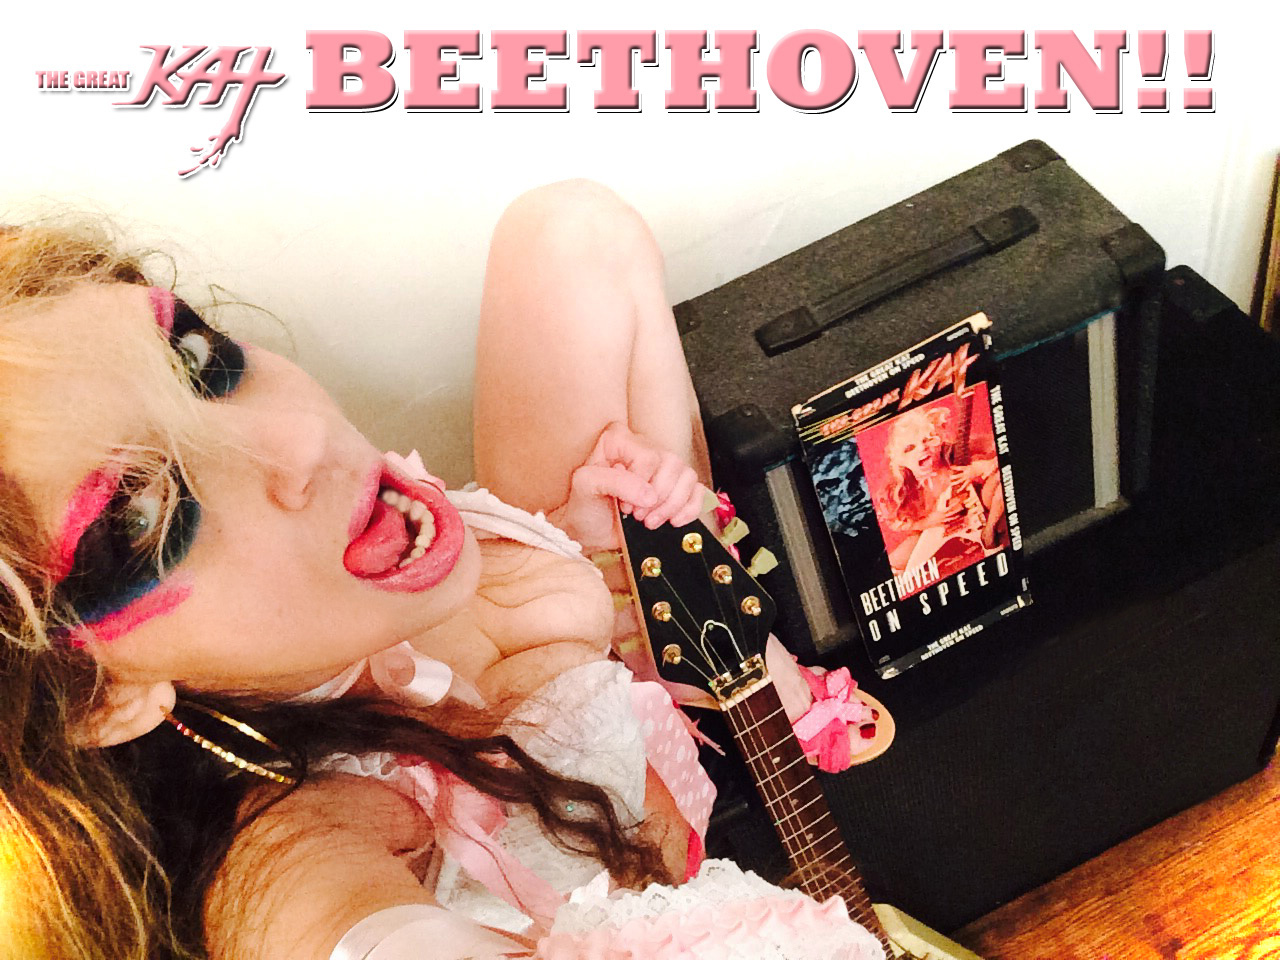 THE GREAT KAT THRASHES BEETHOVEN!